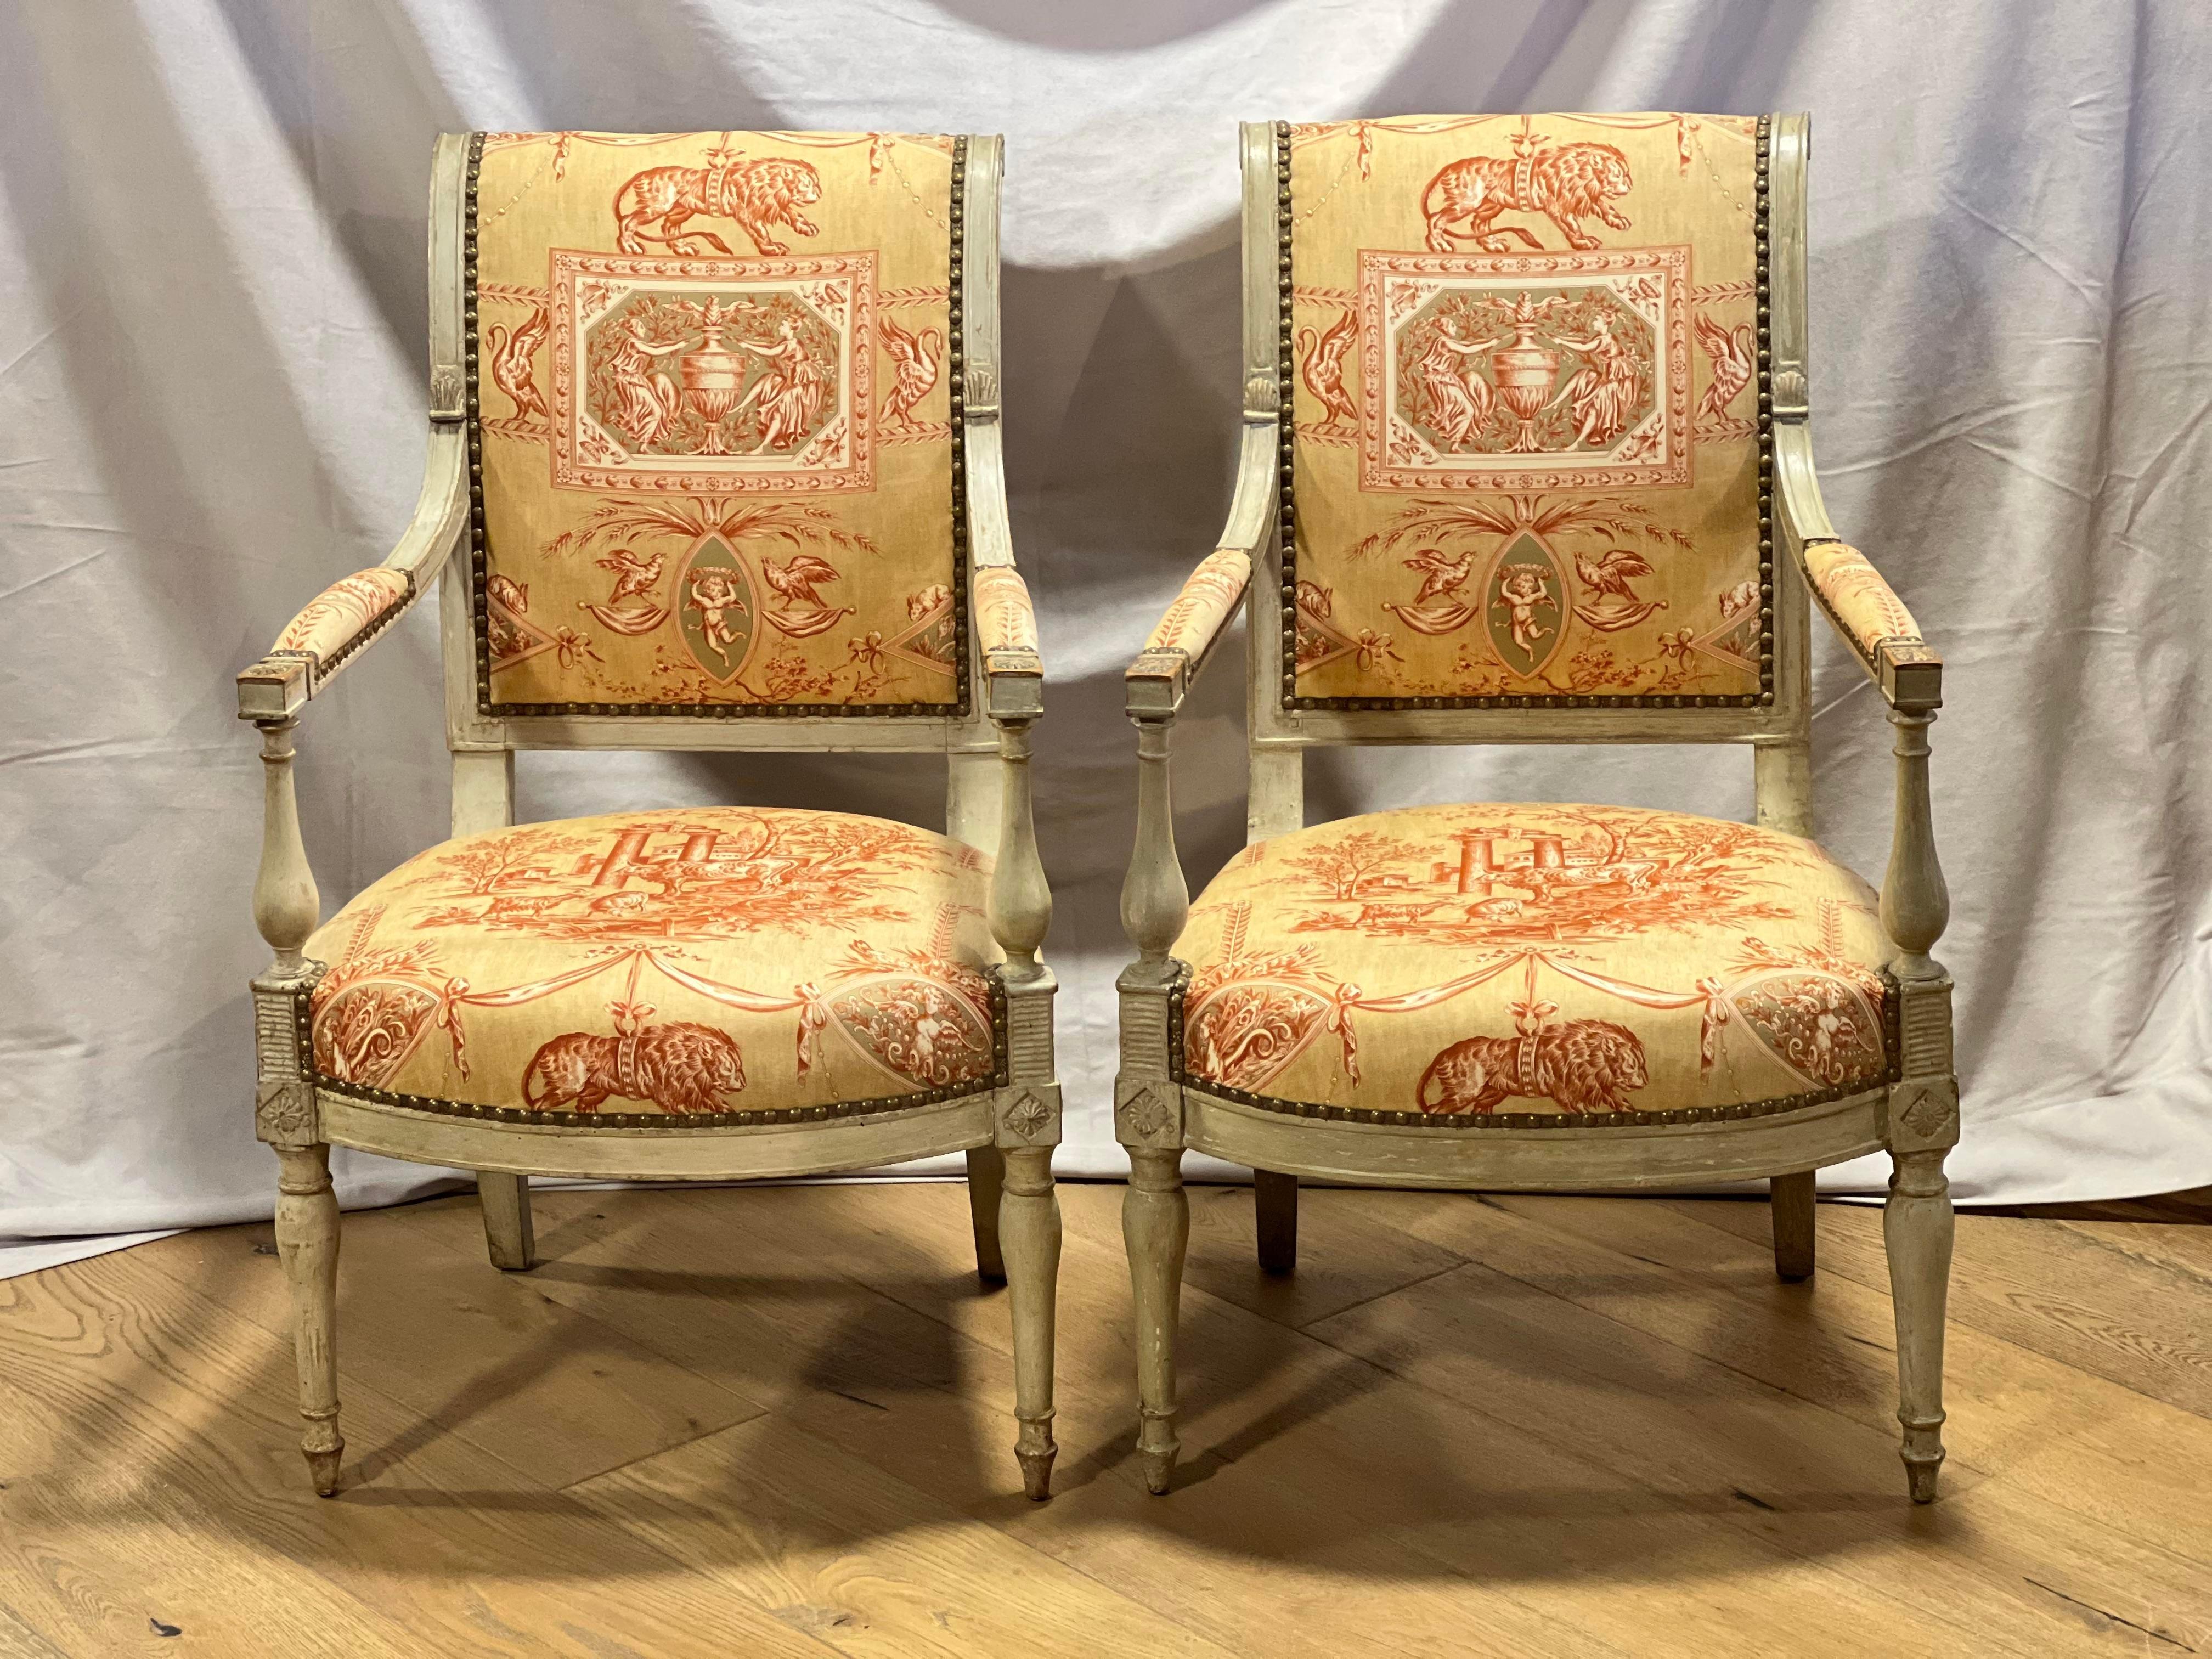 Pair of 18th Century Louis XVI Chairs.  Gorgeous upholstry and shape